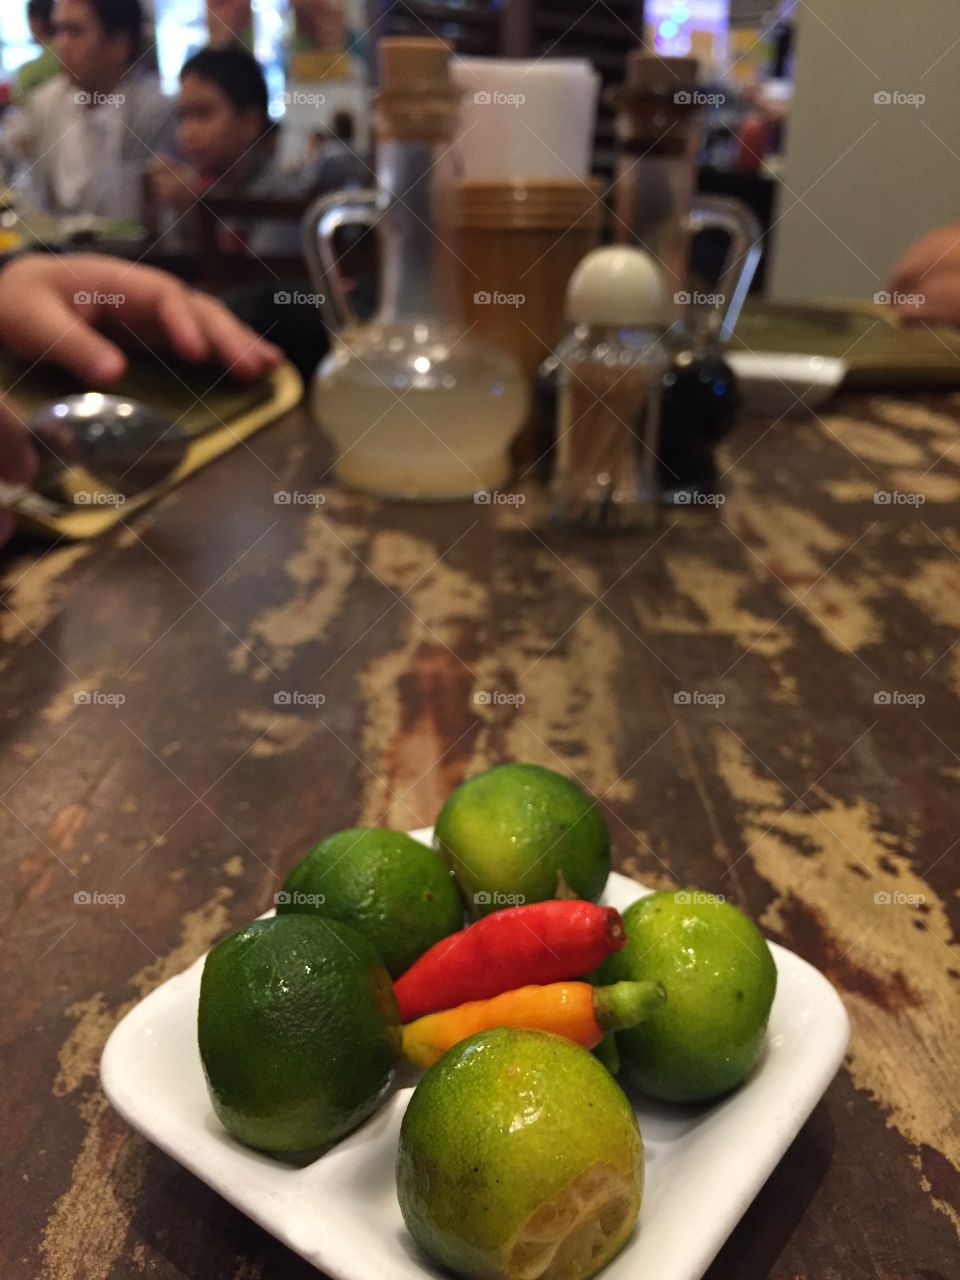 Not all condiments are equal. In the Philippines, it isn't salt and pepper or even ketchup and mustard. It's fresh calamansi and small hot peppers.